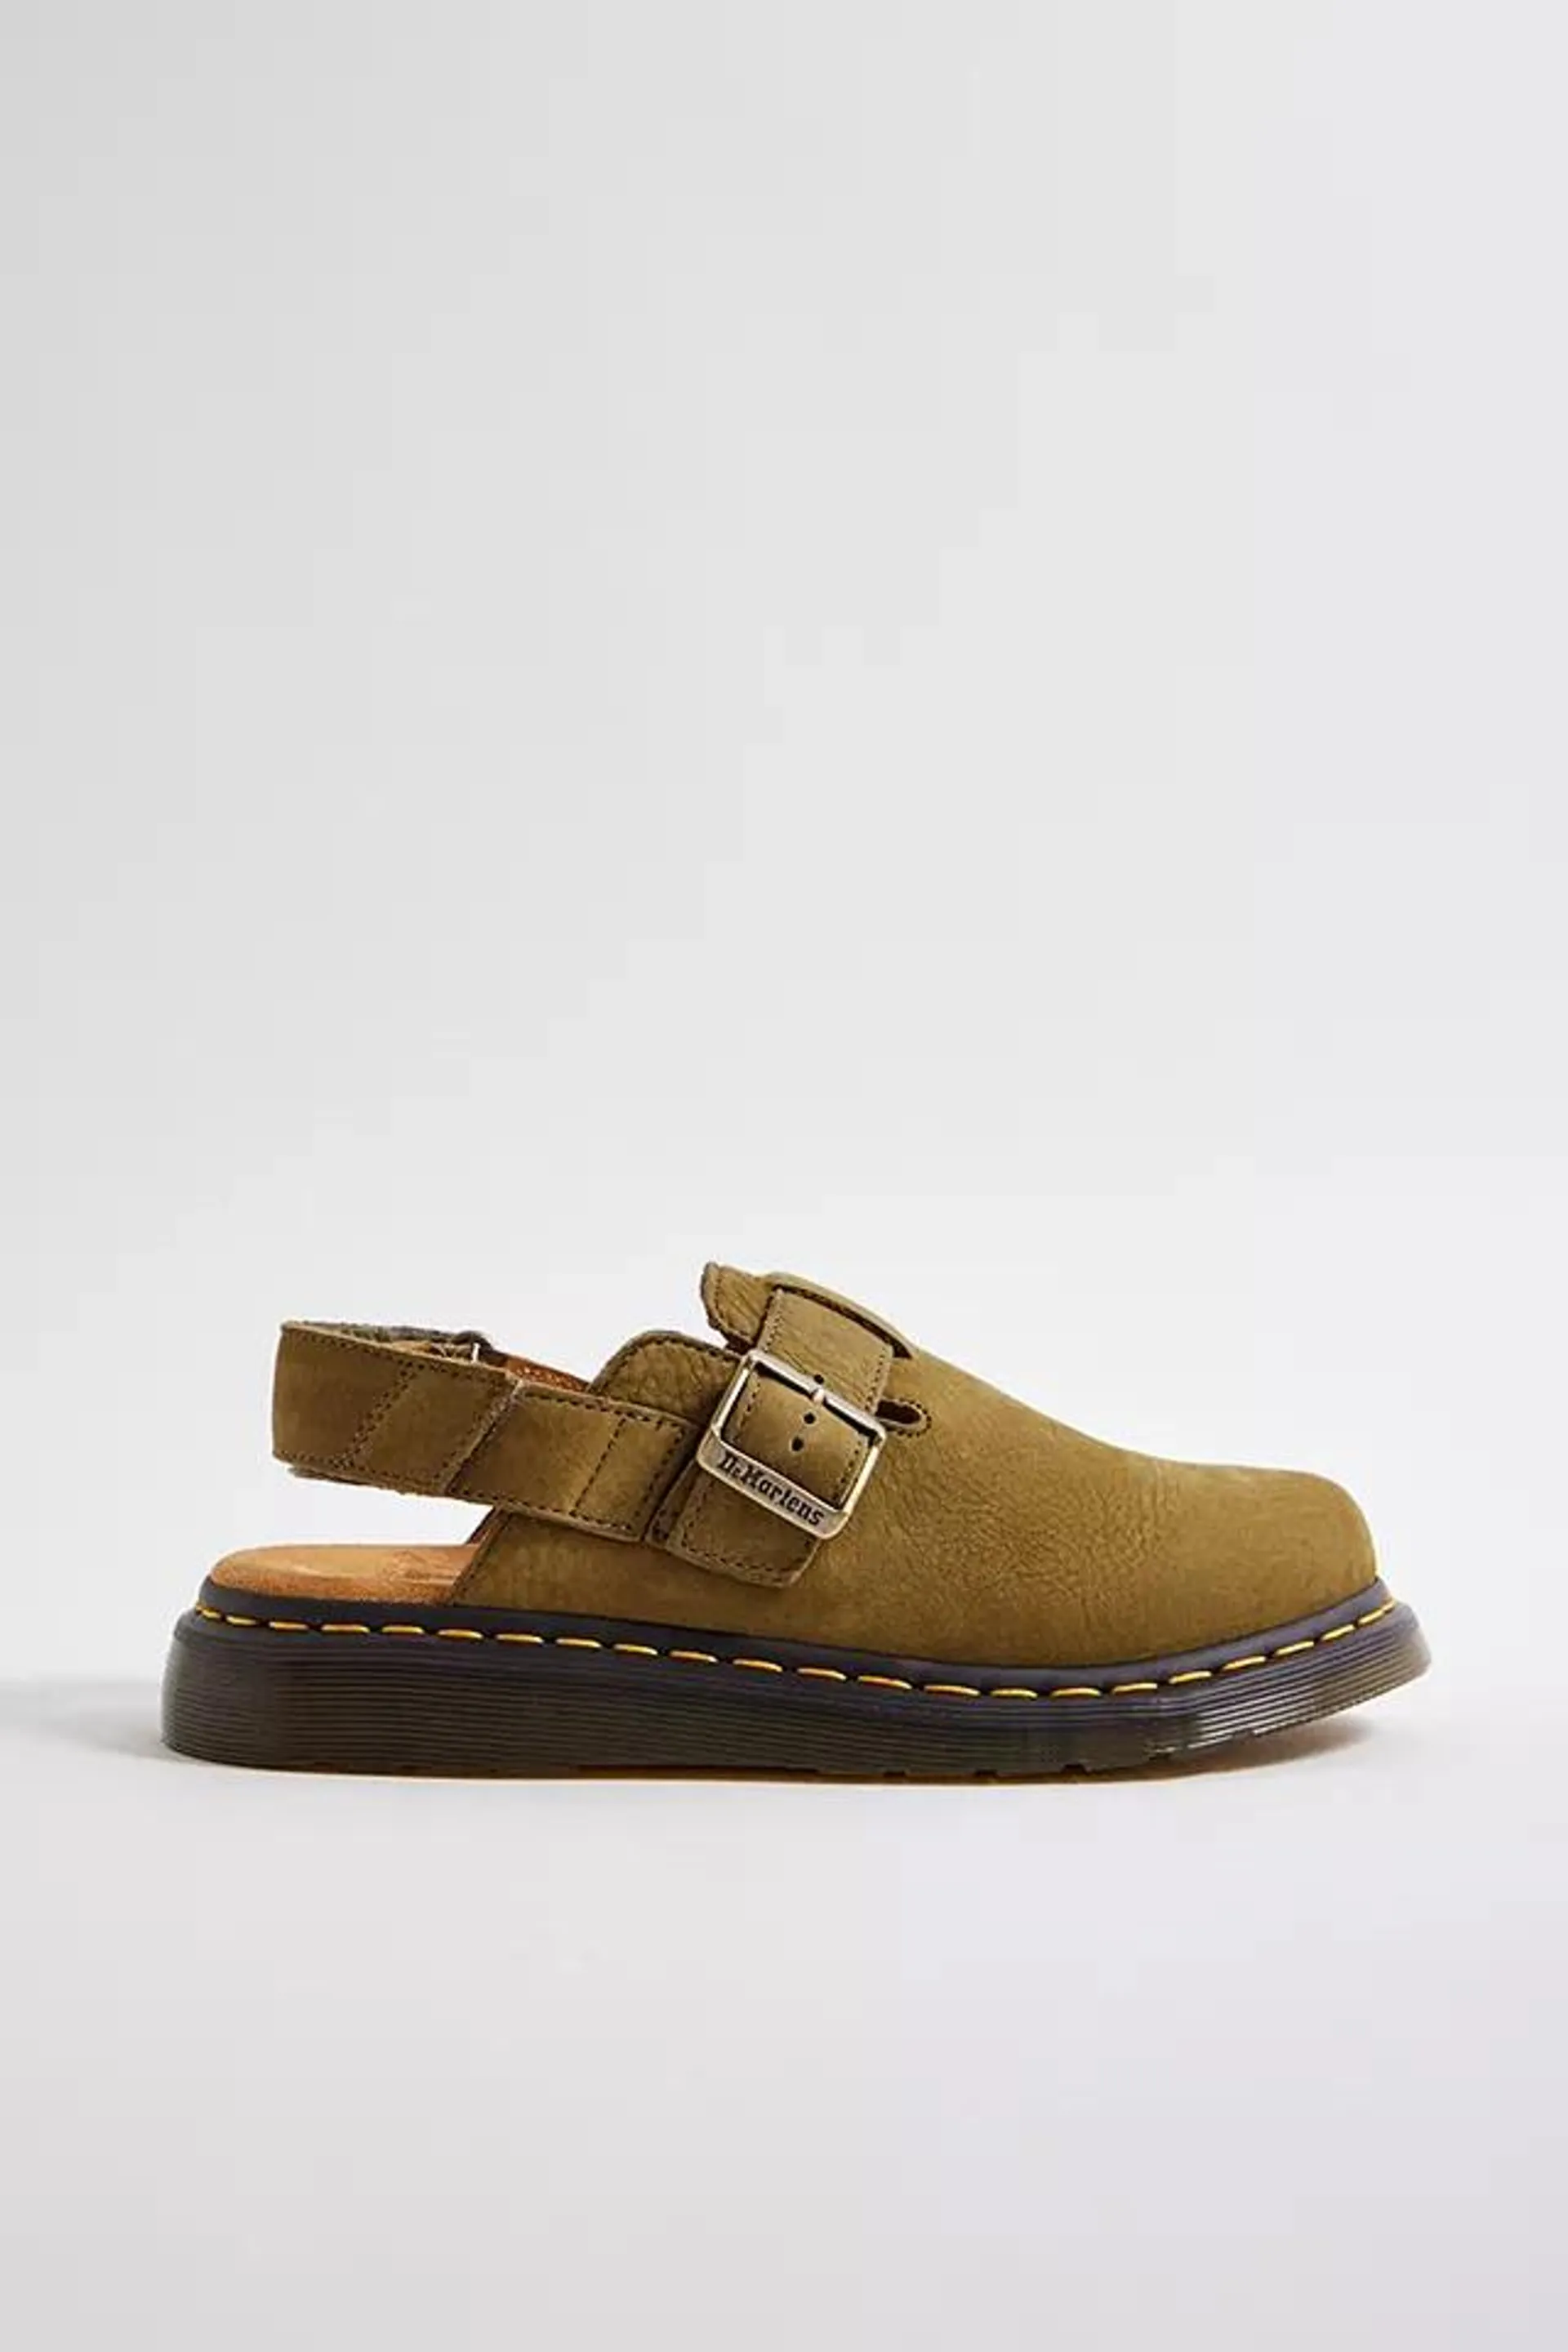 Dr. Martens Jorge II Muted Olive Leather Mules